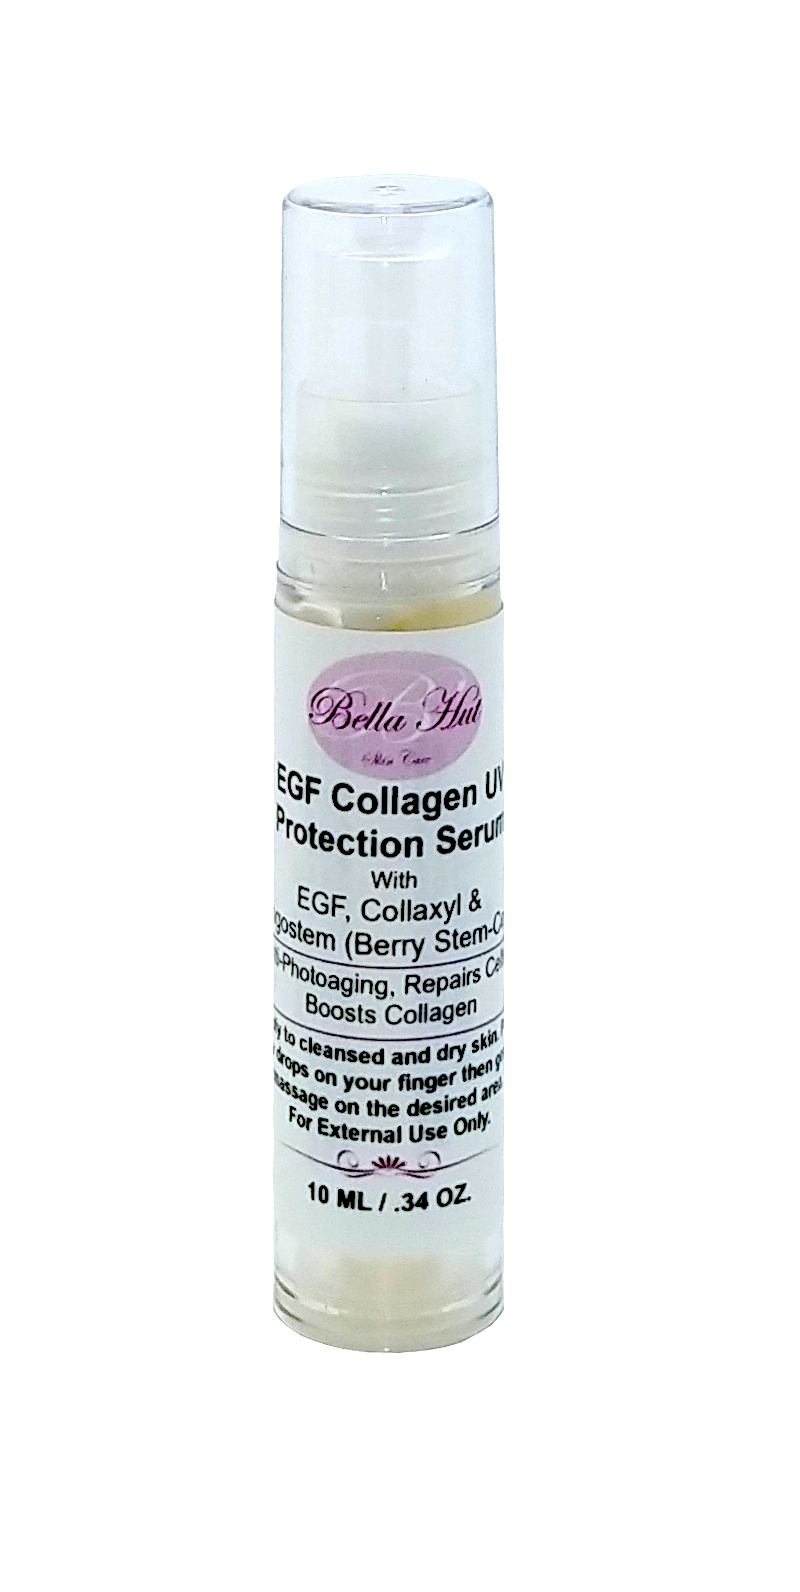 A skin care serum that helps to protect against UV and boosts collagen and more